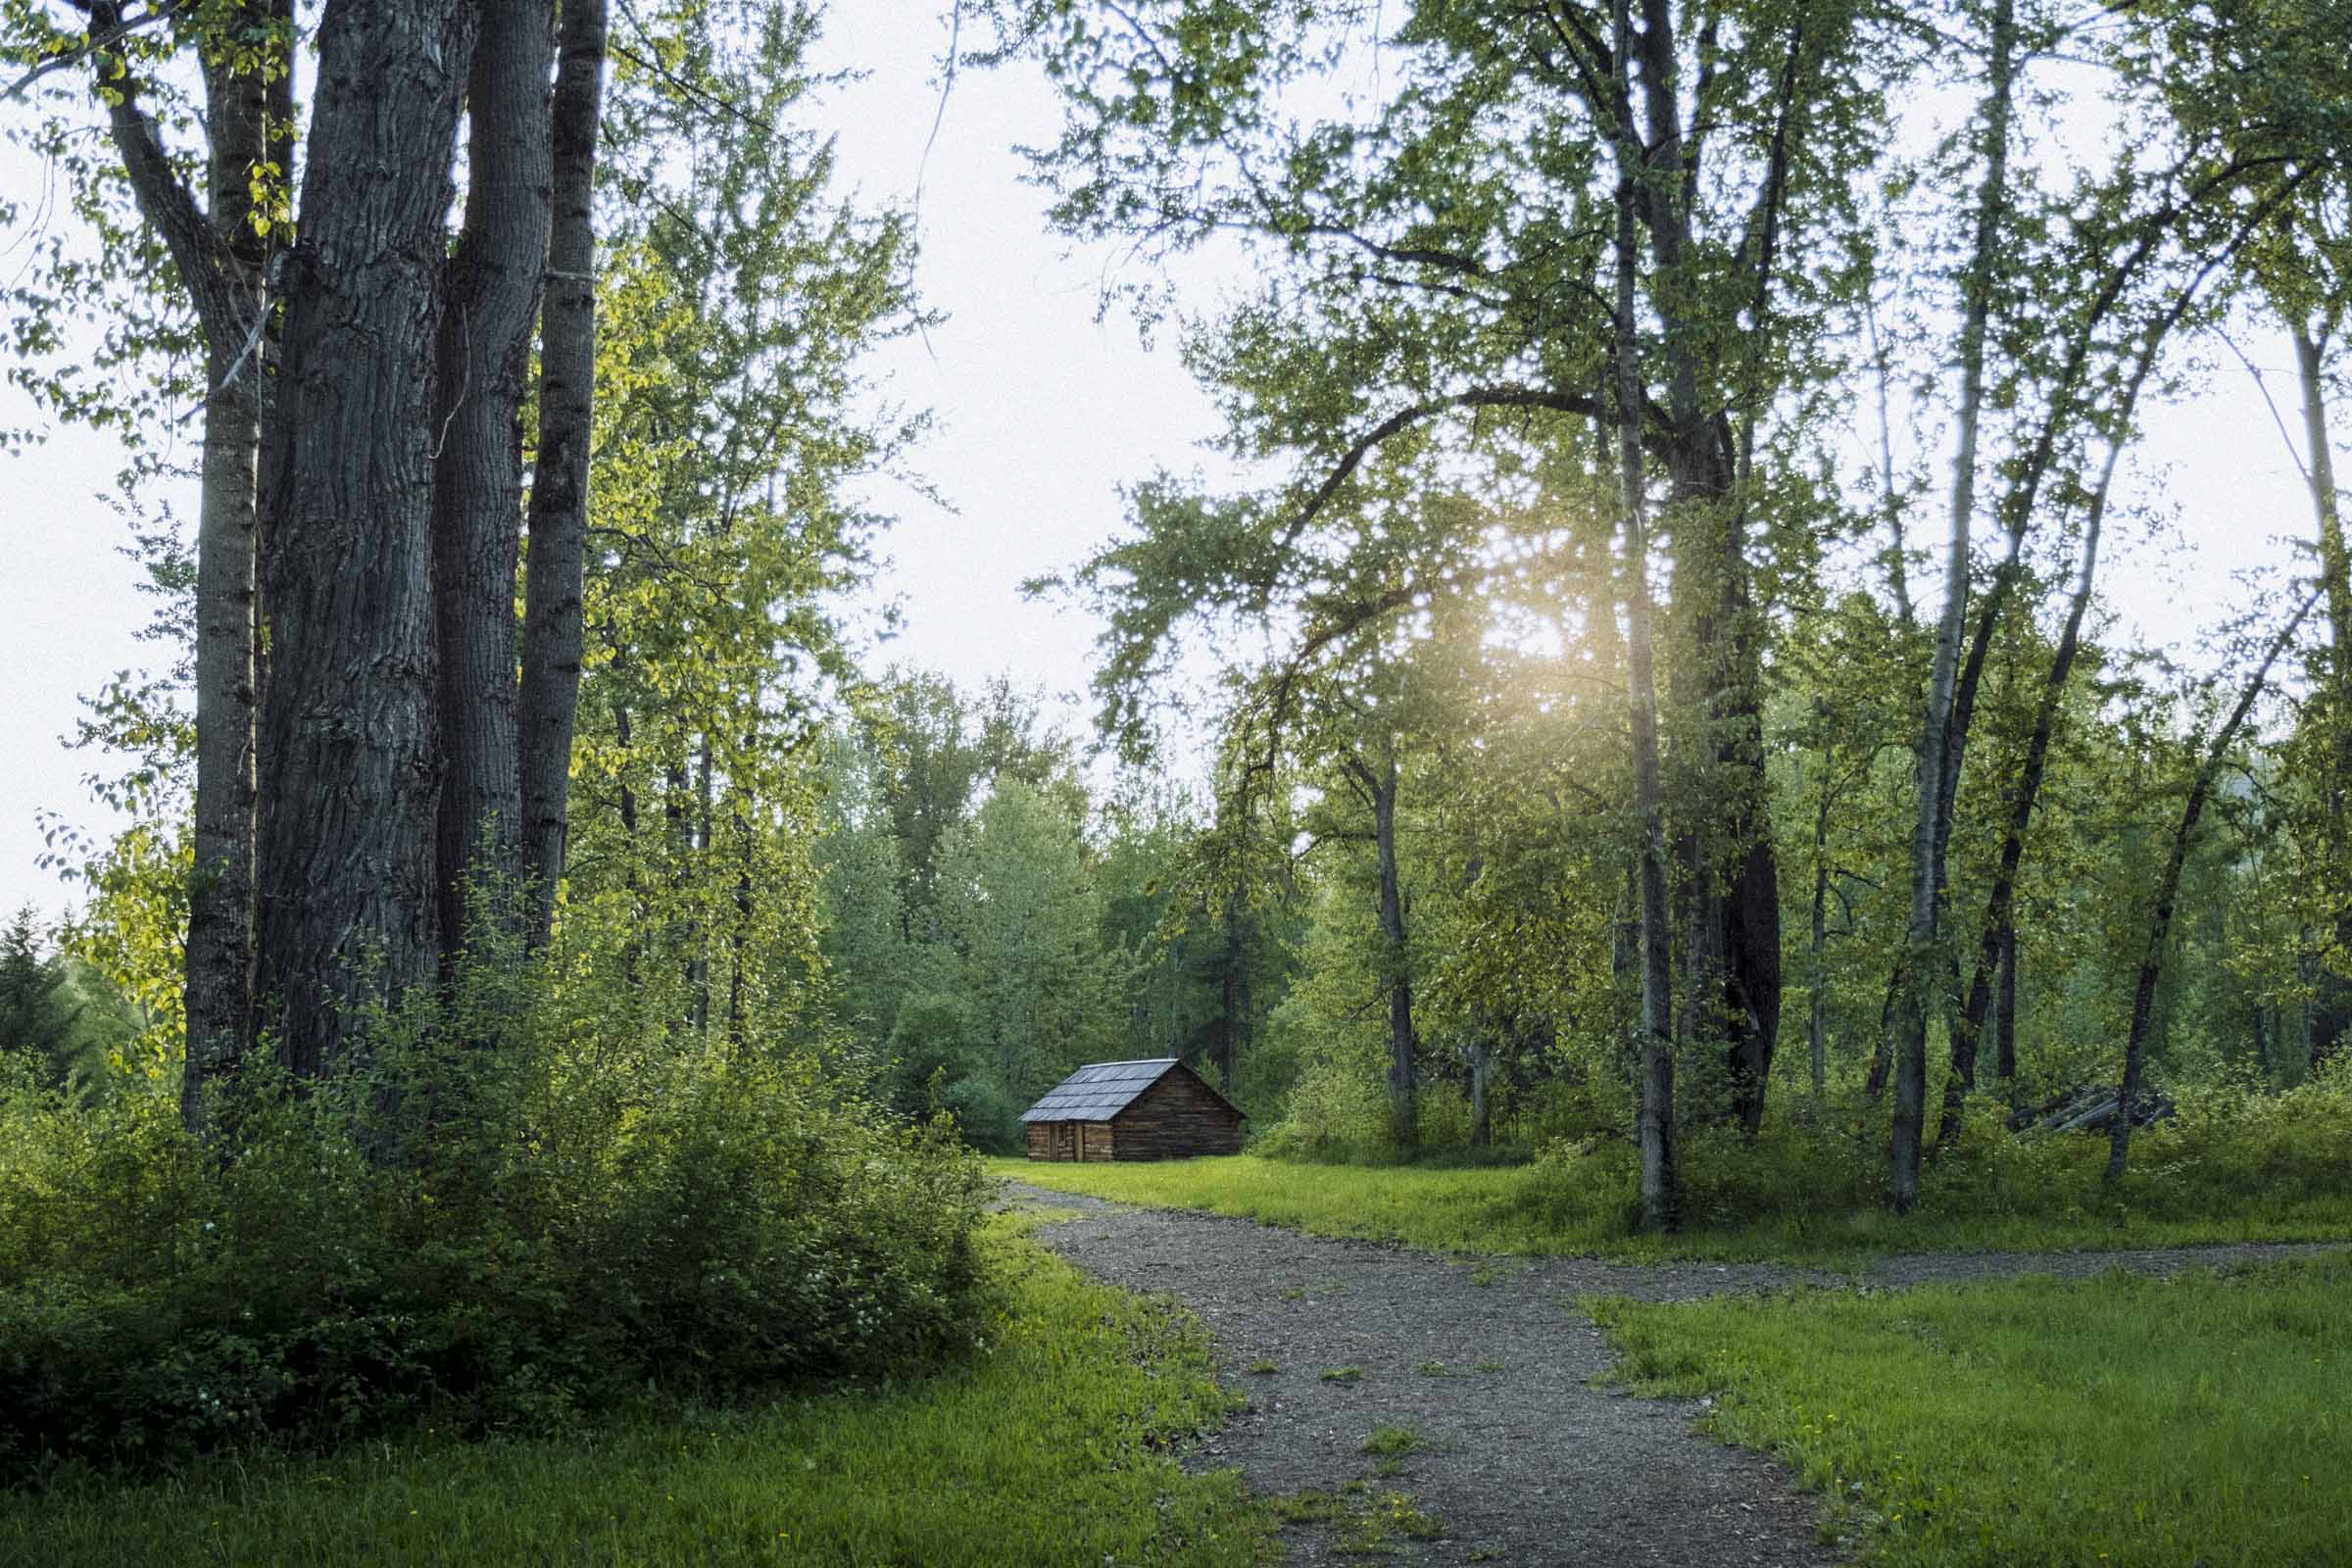 Evening at the Quesnel Forks Historic Site